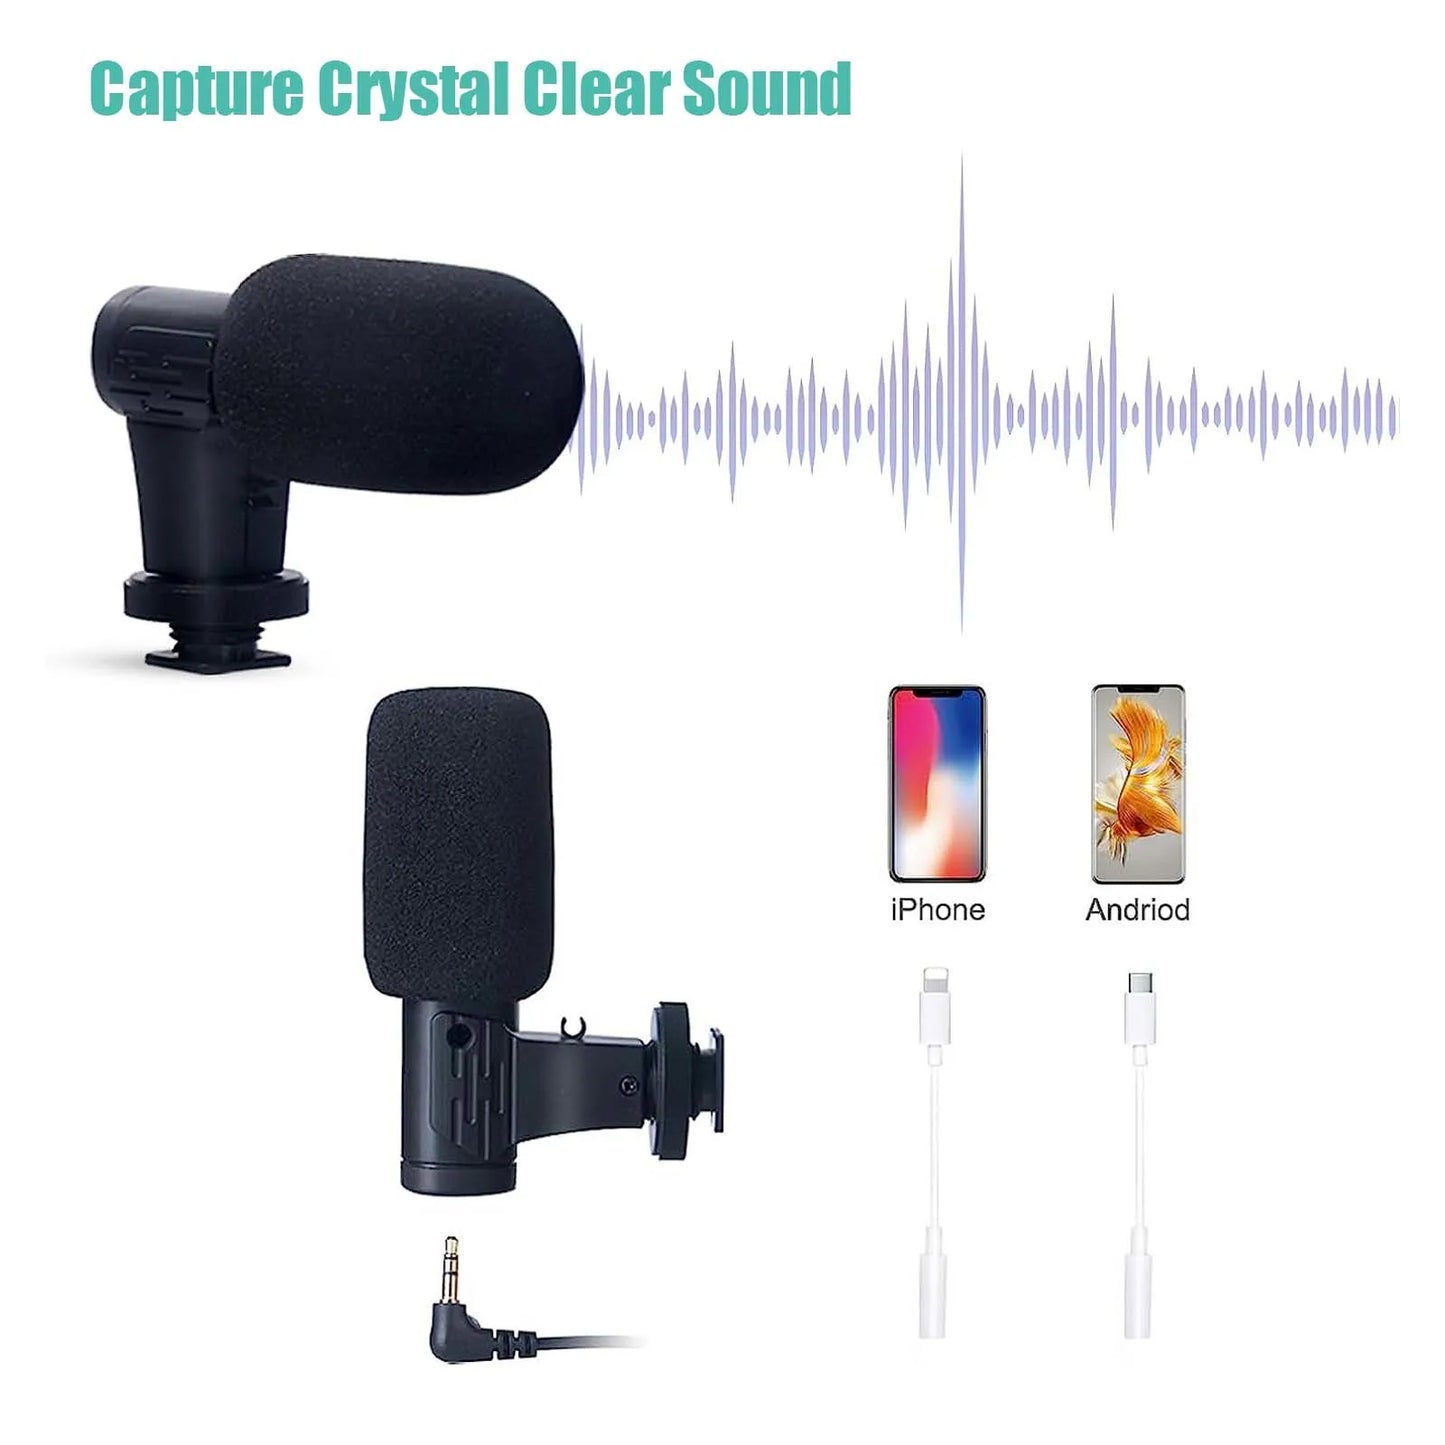 Smartphone Vlogging Kit for iPhone Android with Tripod Mini Microphone Starter Vlog kit for TikTok Live Stream Video YouTube